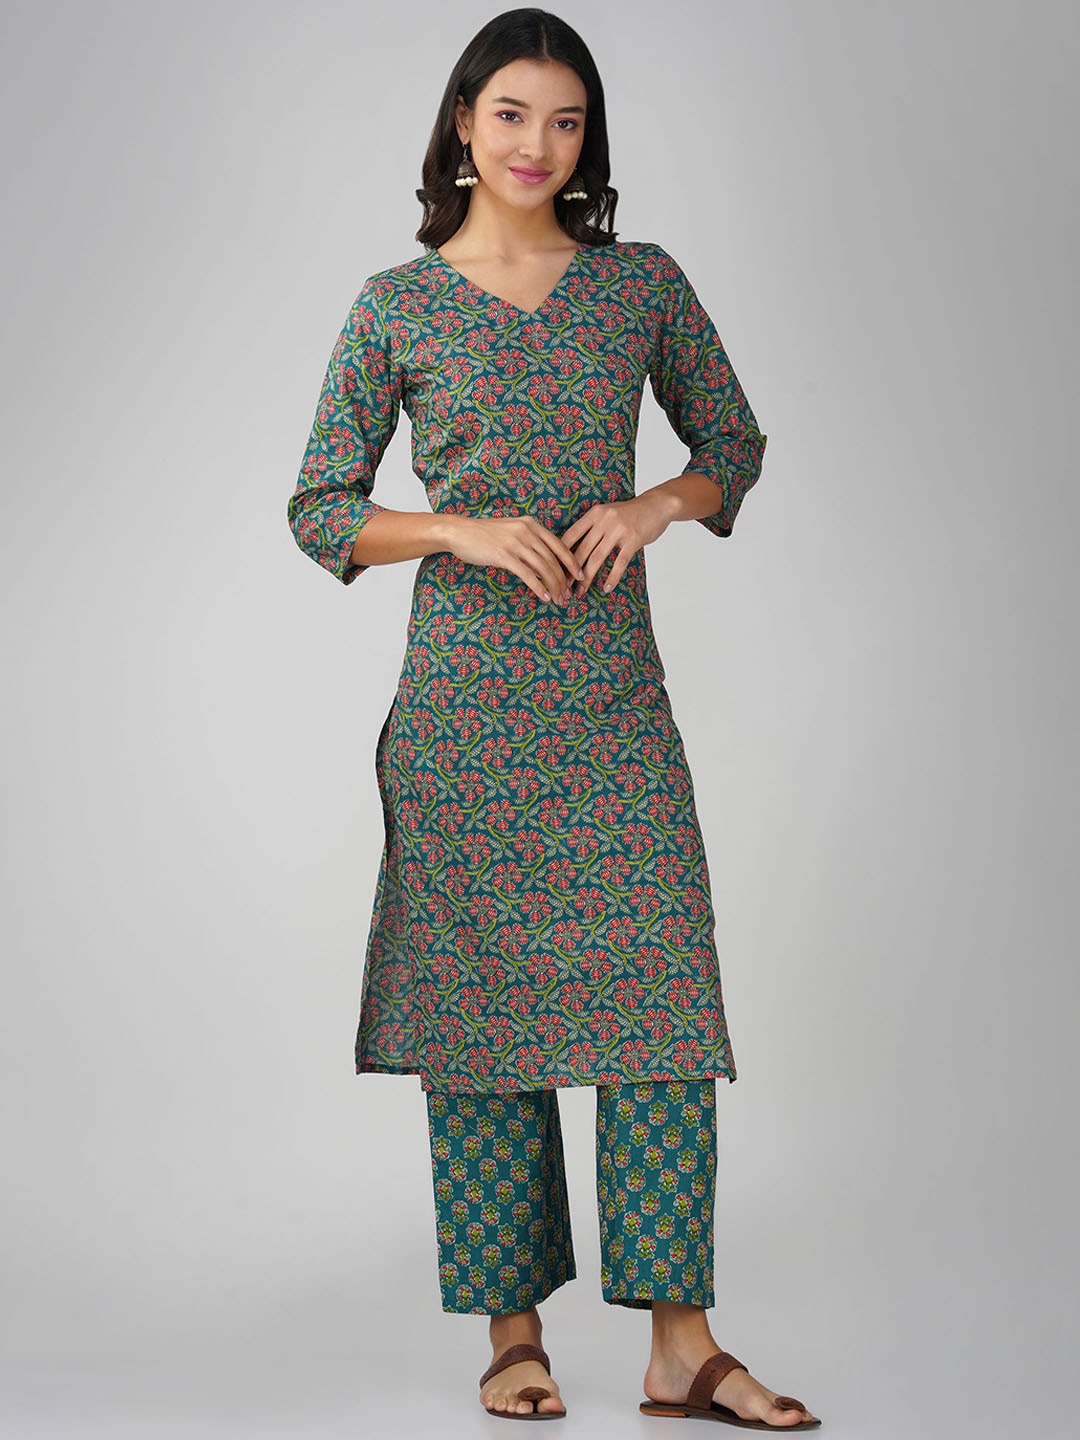 SPARSA Women Floral Printed Regular Pure Cotton Kurta with Palazzos Price in India